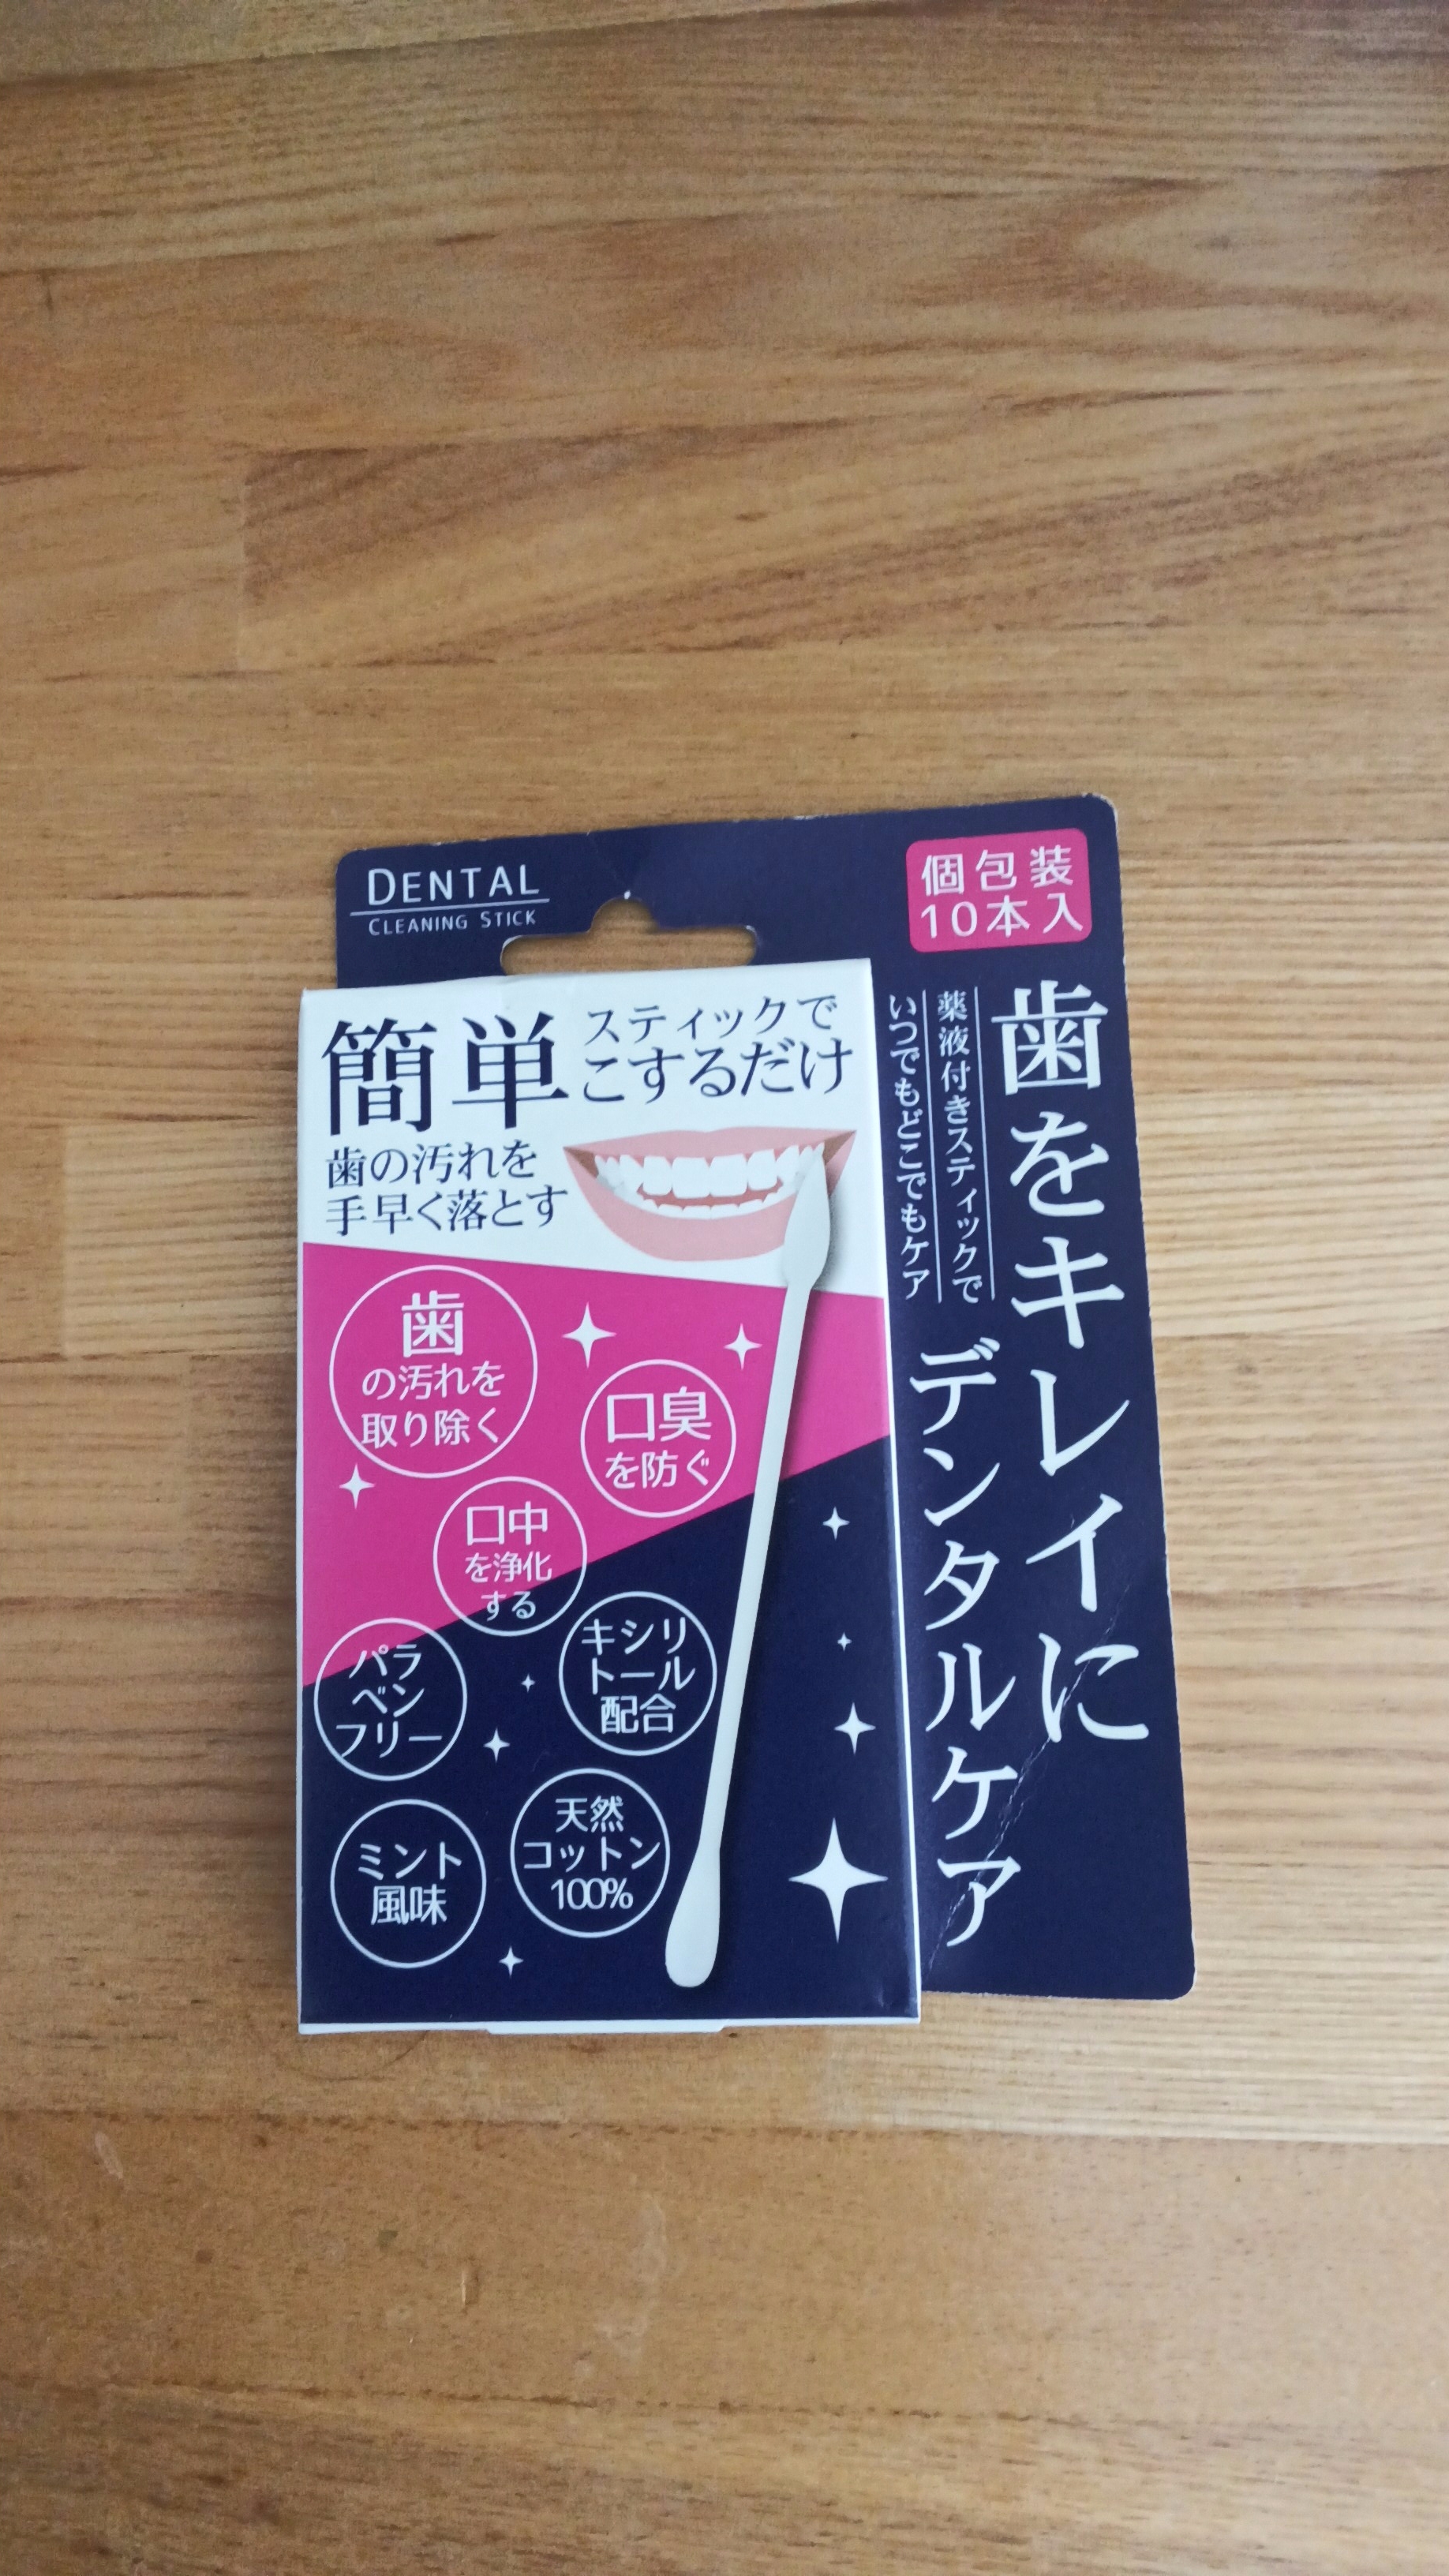 ★2022/9/23★DENTAL CLEANING STICK